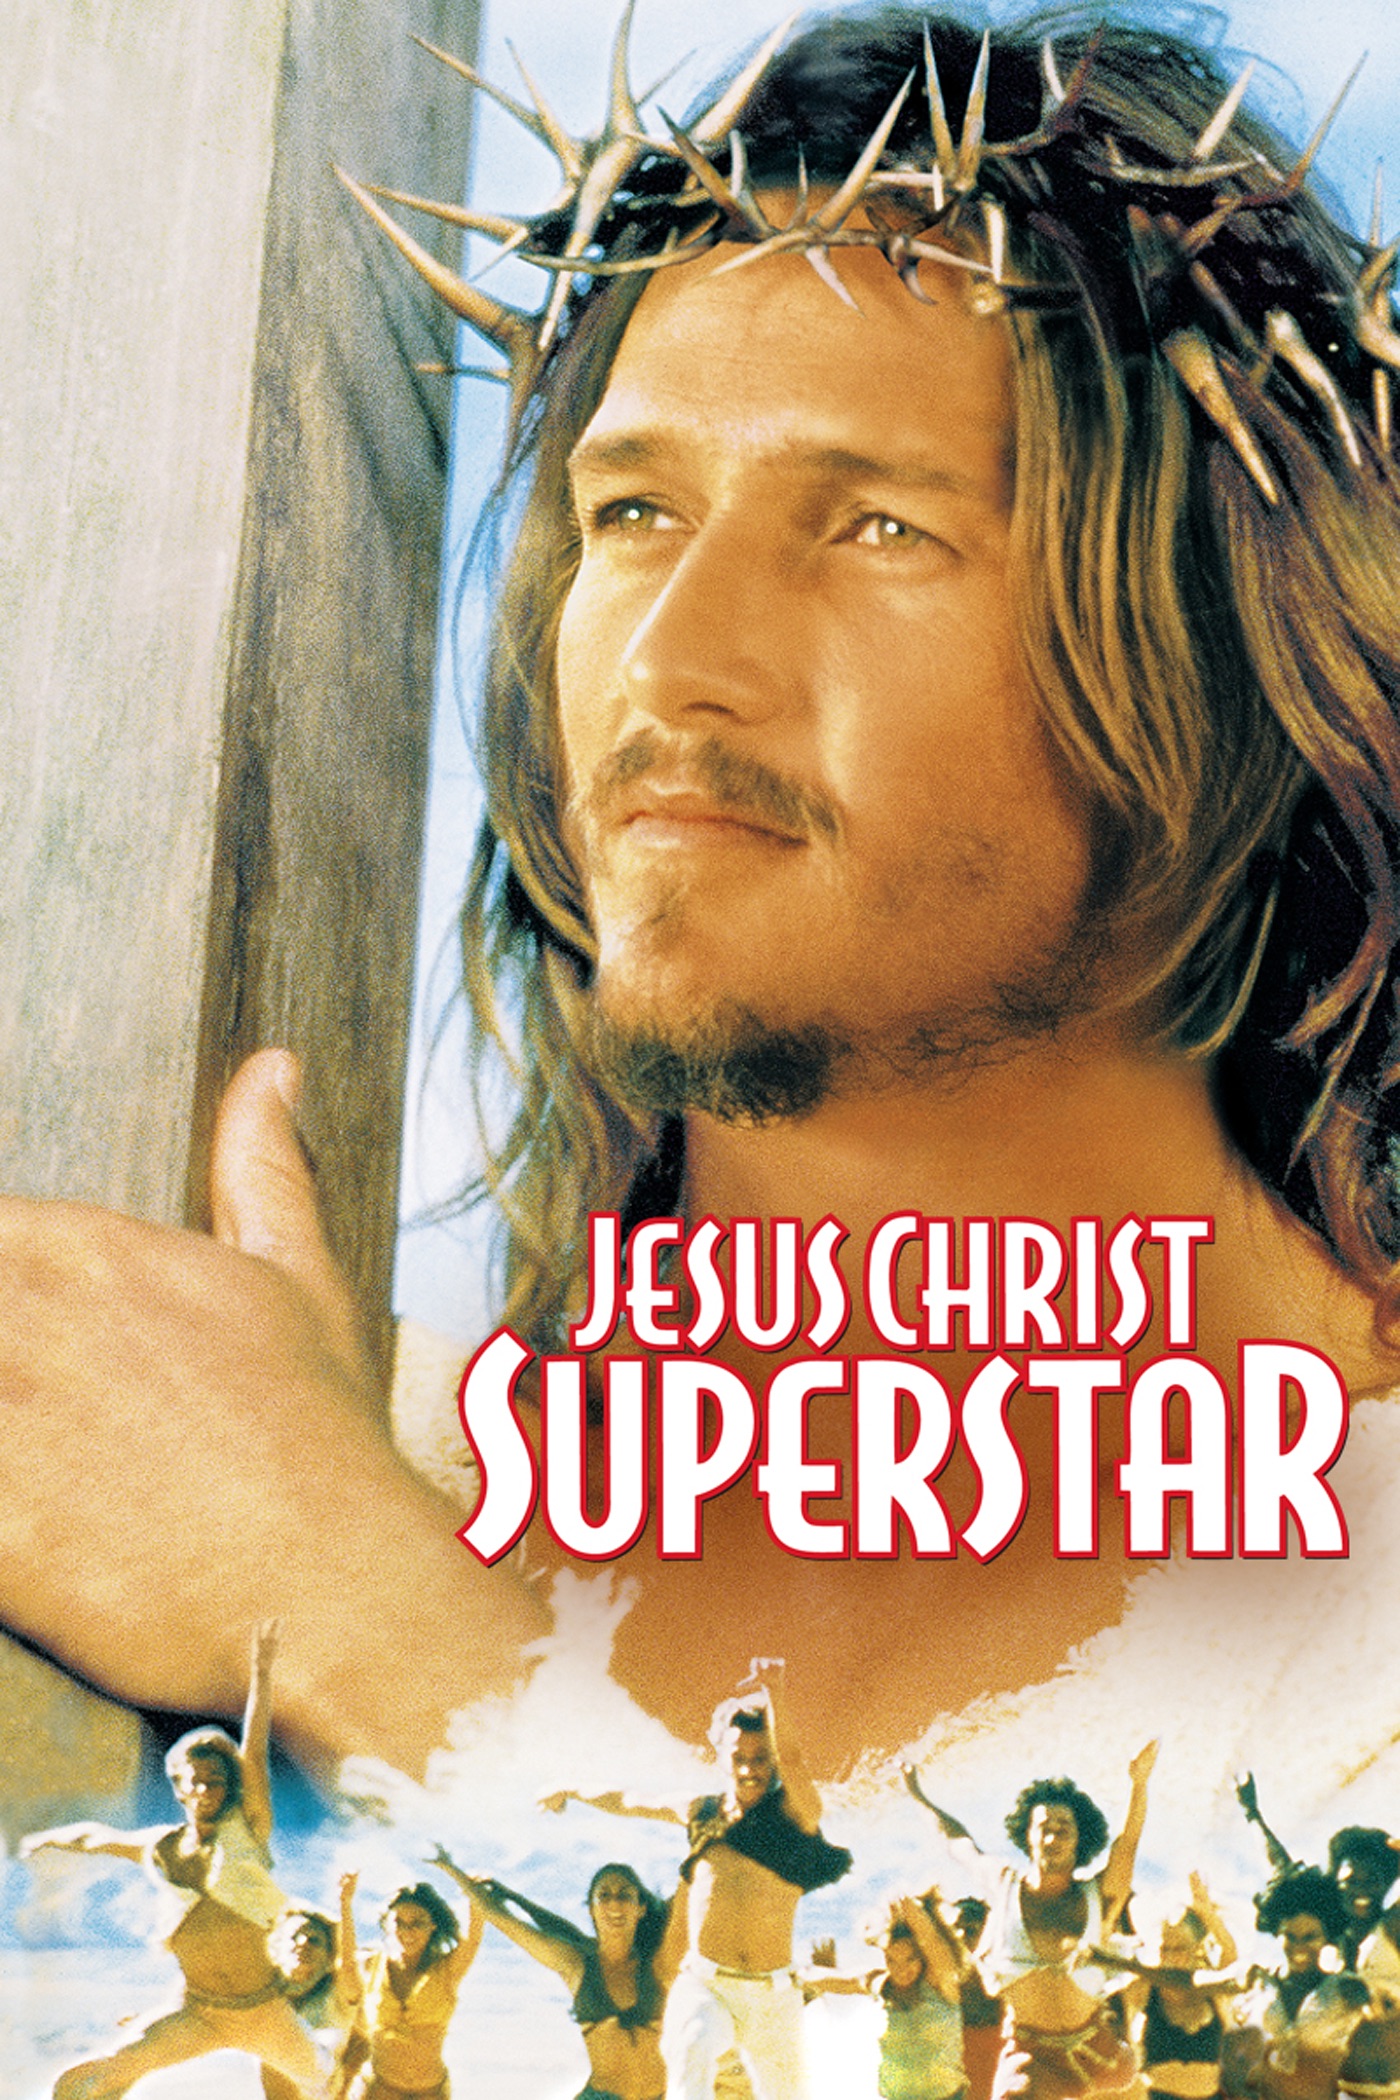 the movies superstar edition download